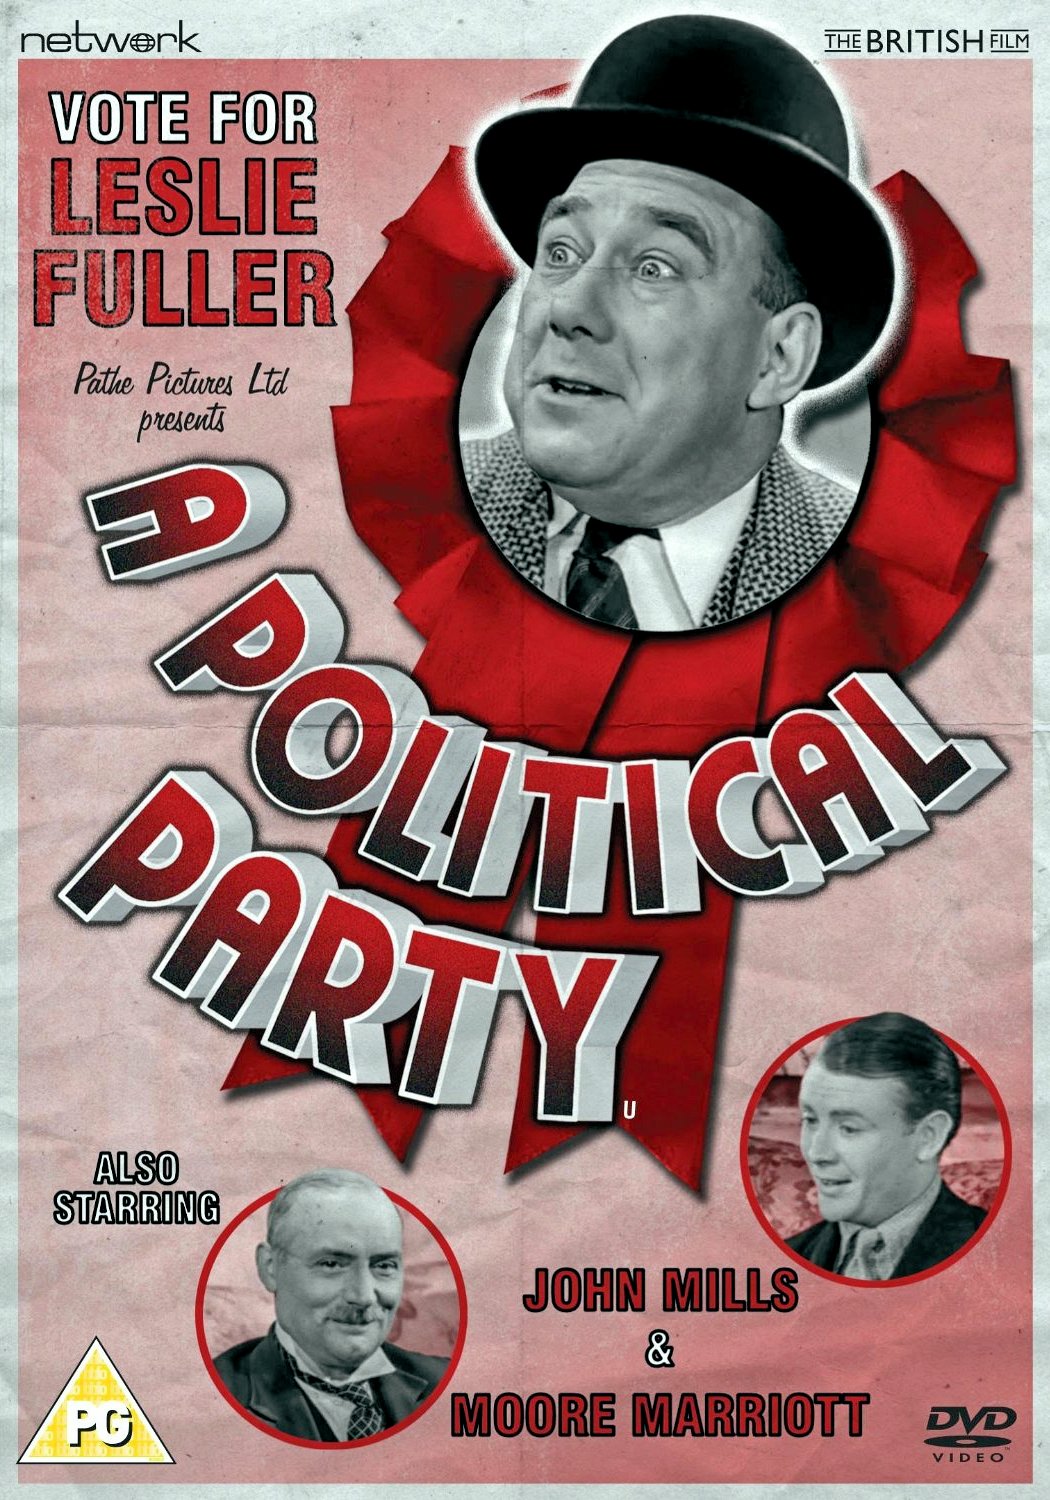 A Political Party DVD from Network and The British Film.  Features Leslie Fuller, Moore Marriott and John Mills.